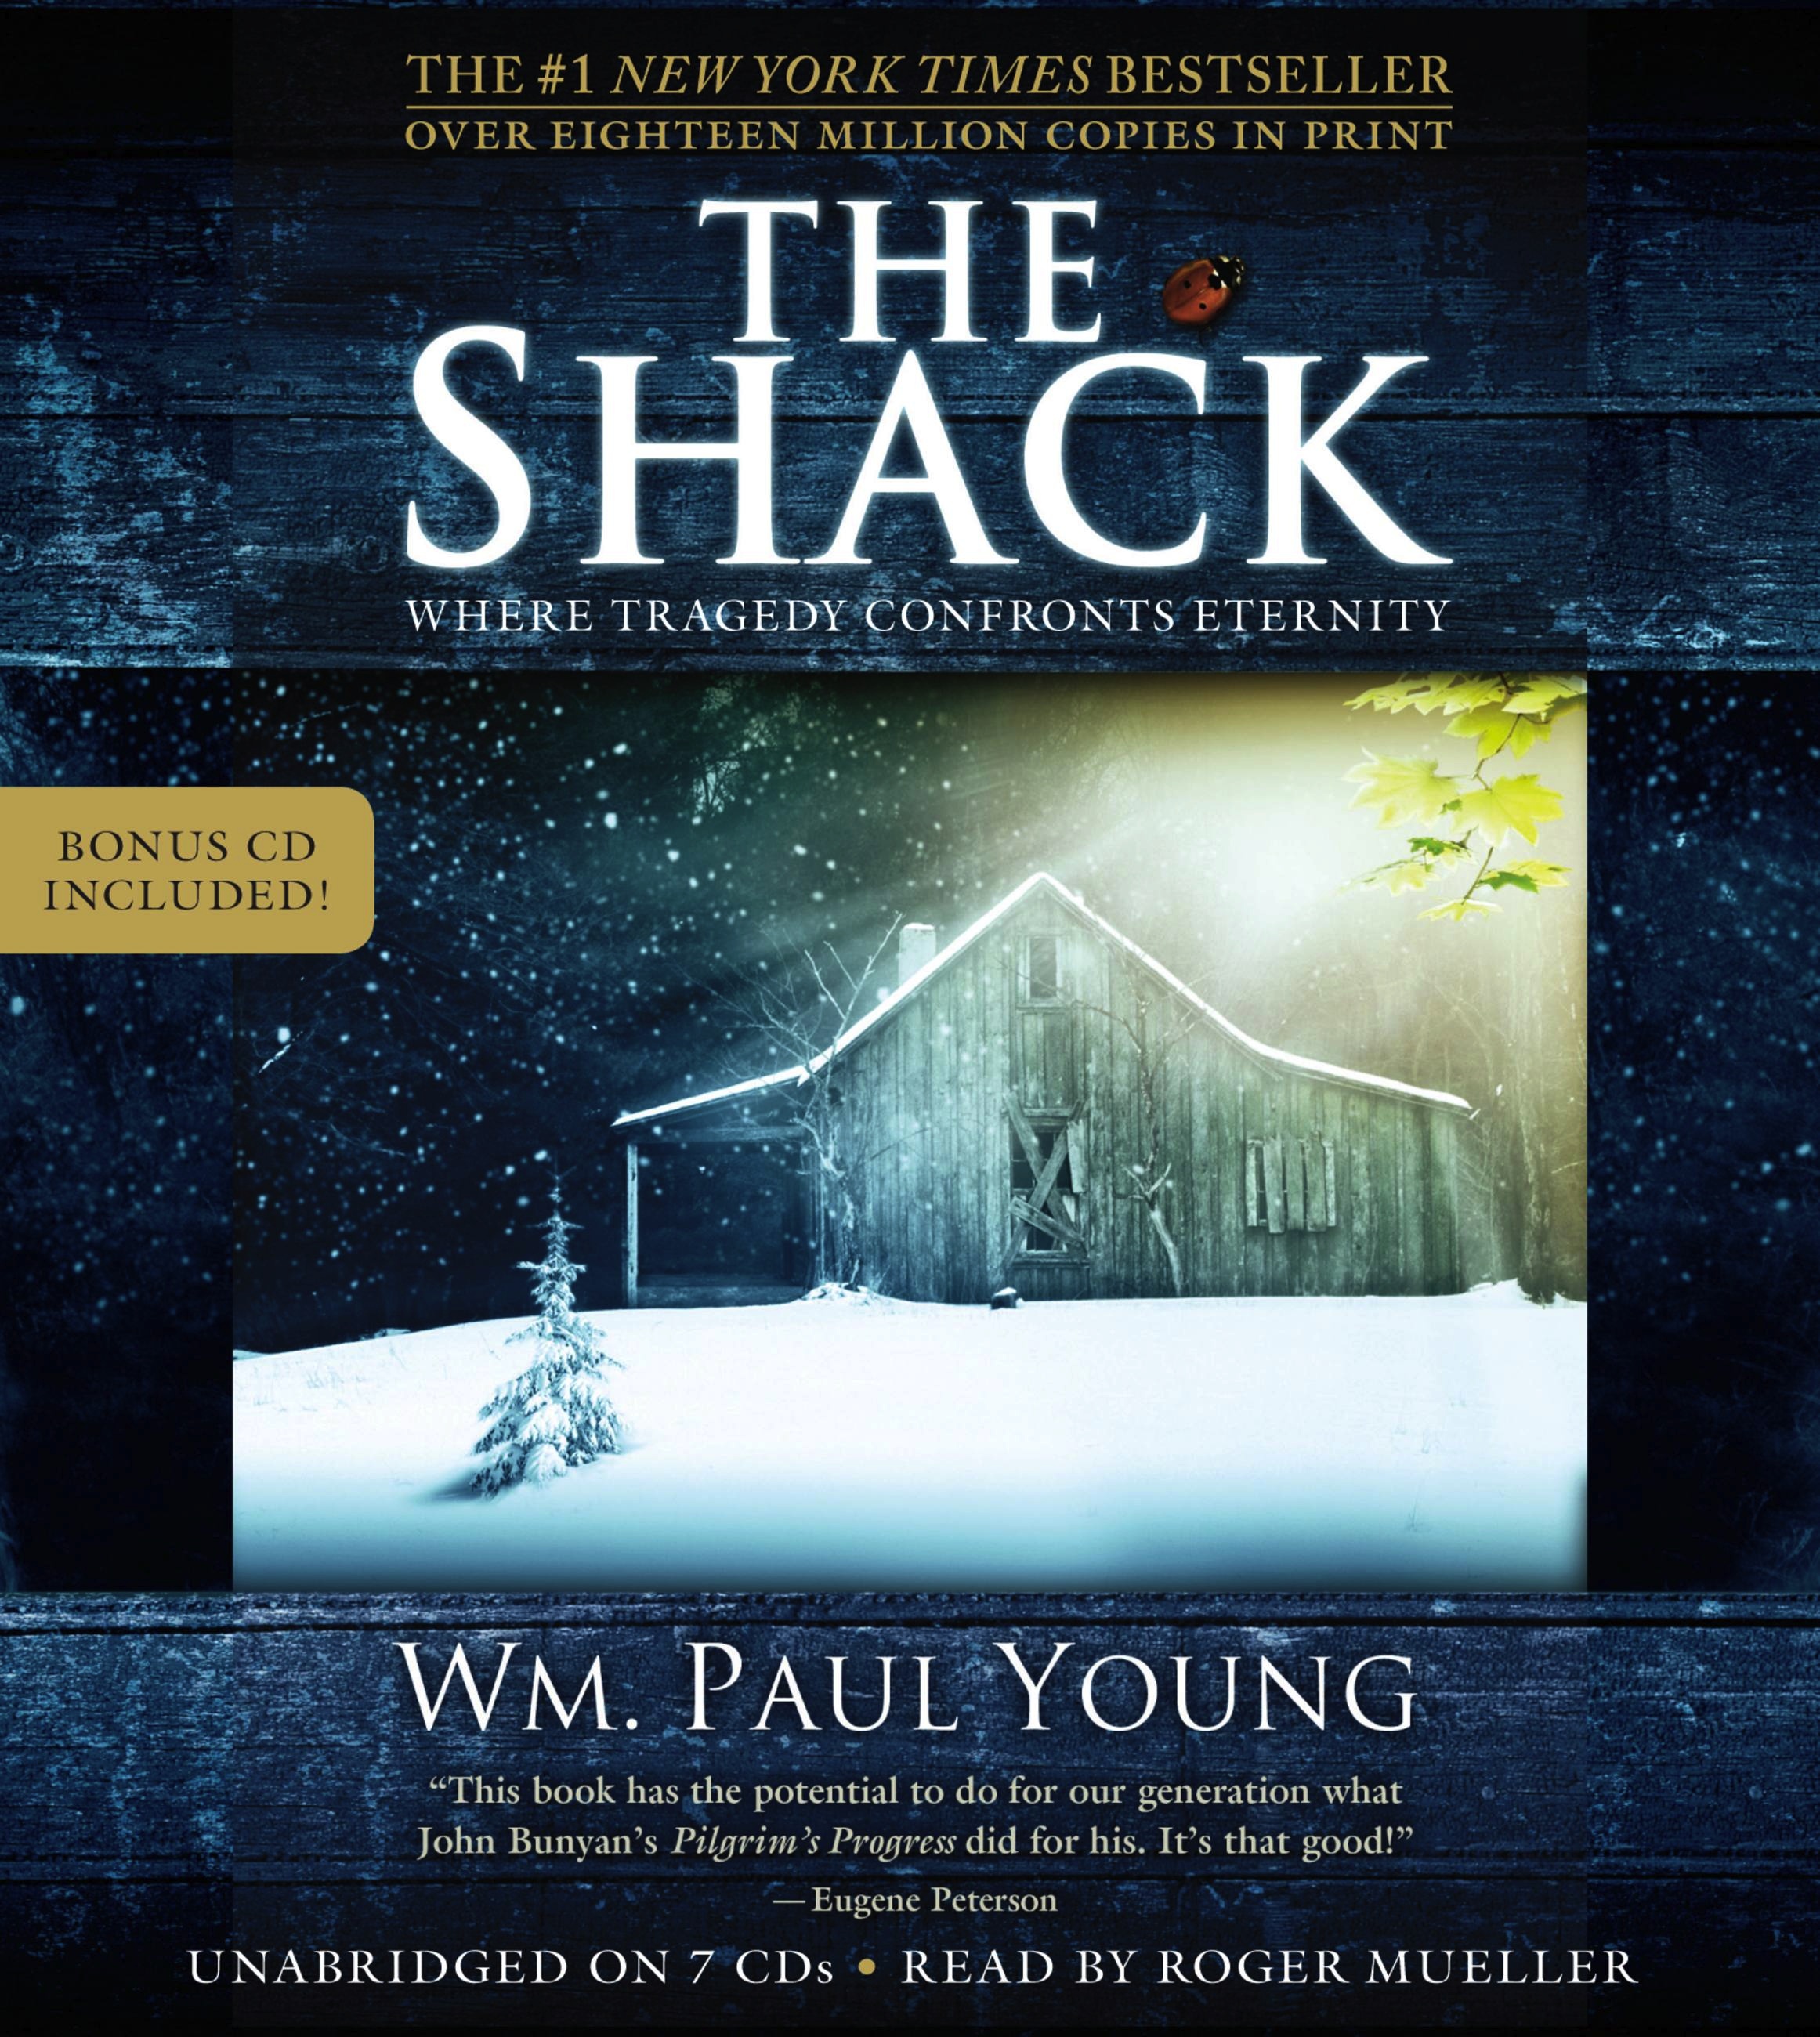 The Shack by William P. Young | Hachette Book Group